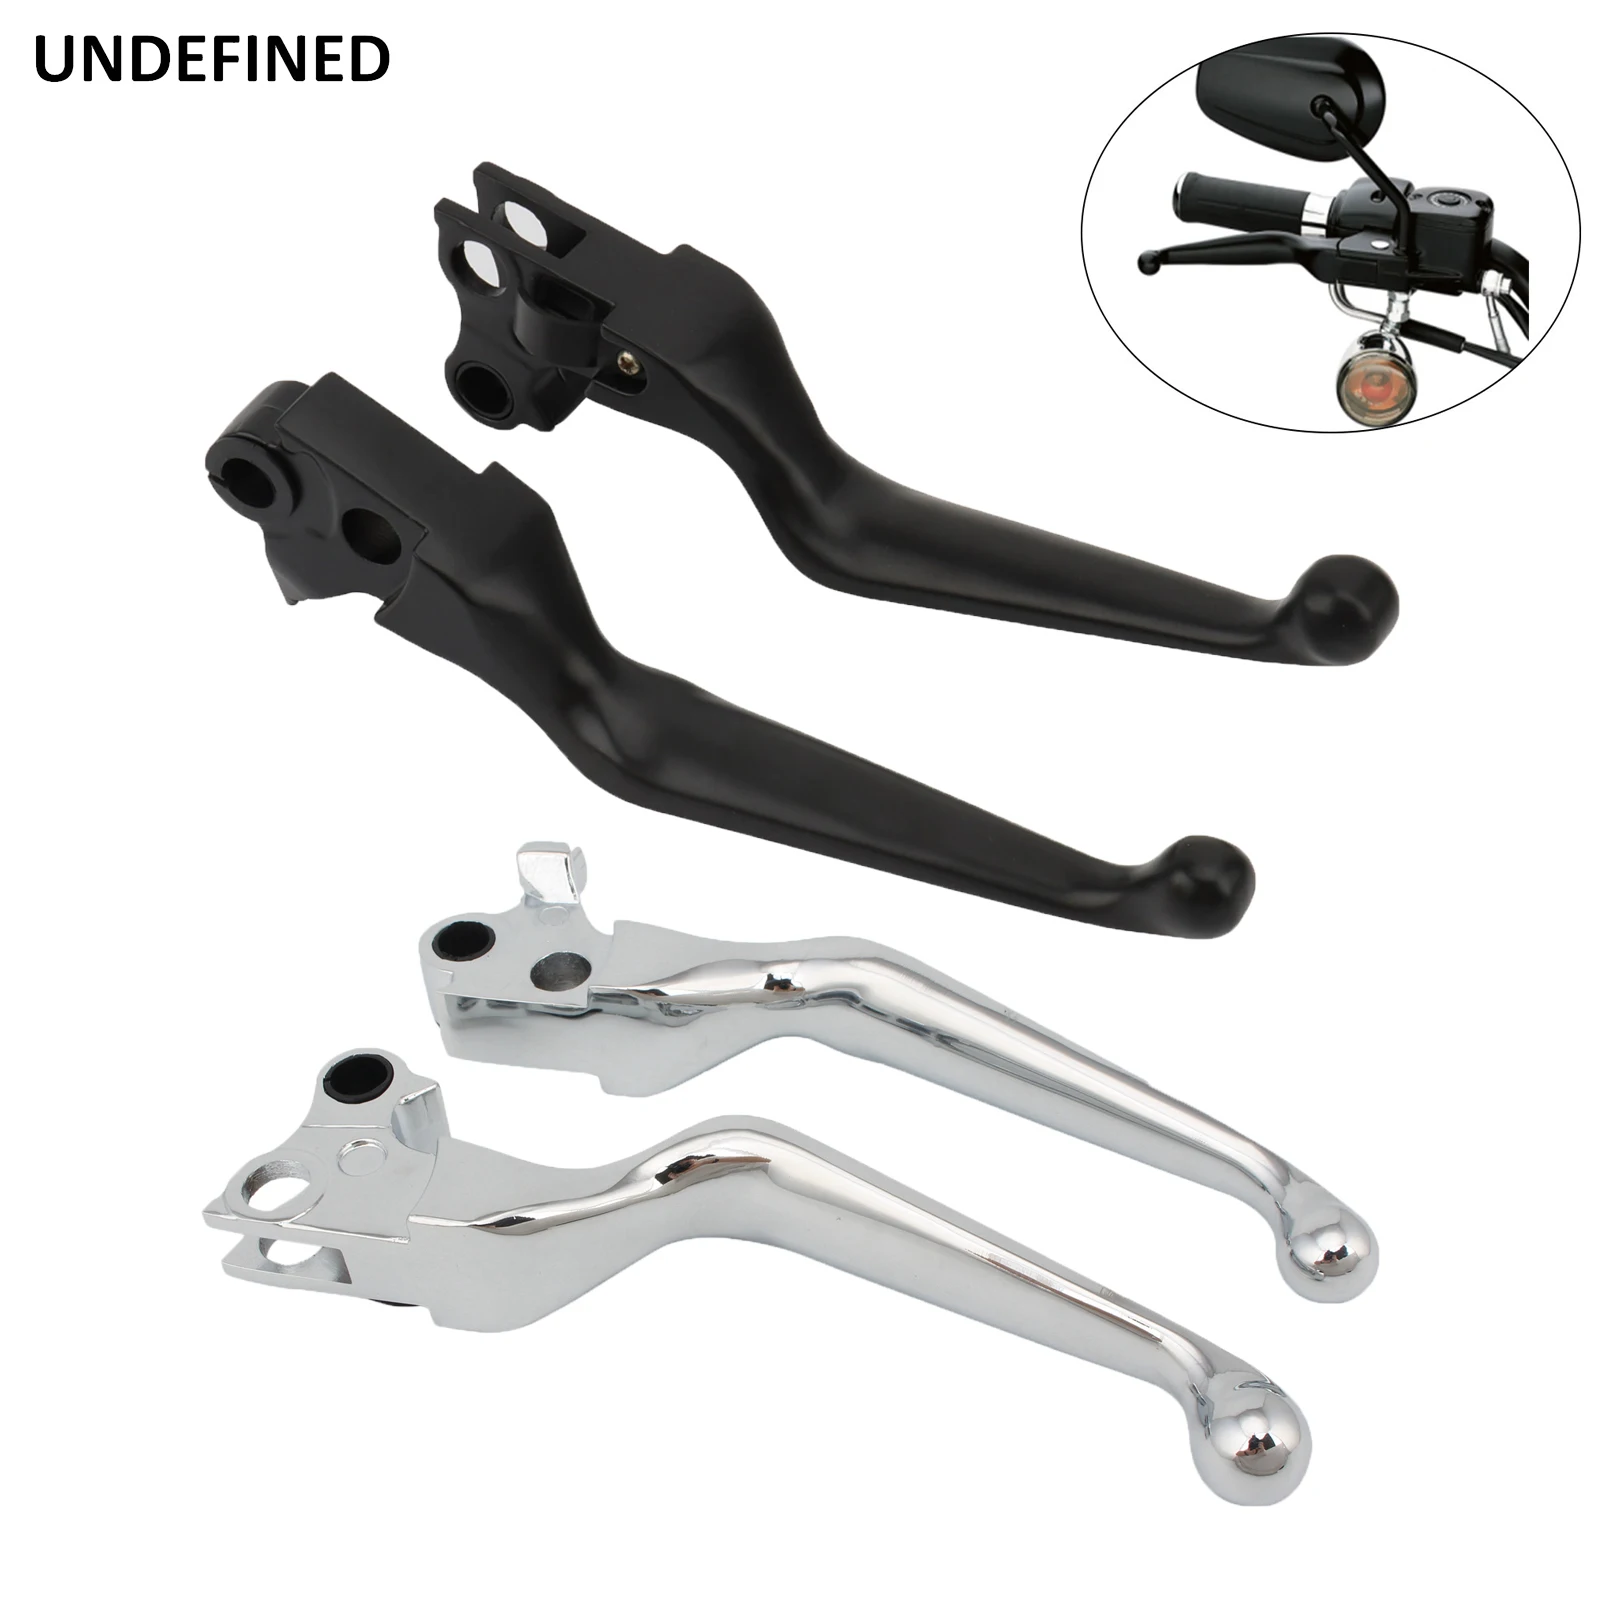 

Motorcycle Chrome Black Brake Clutch Levers For Harley Touring Road King Sportster XL 883 1200 Softail Fat Boy Dyna Low Rider